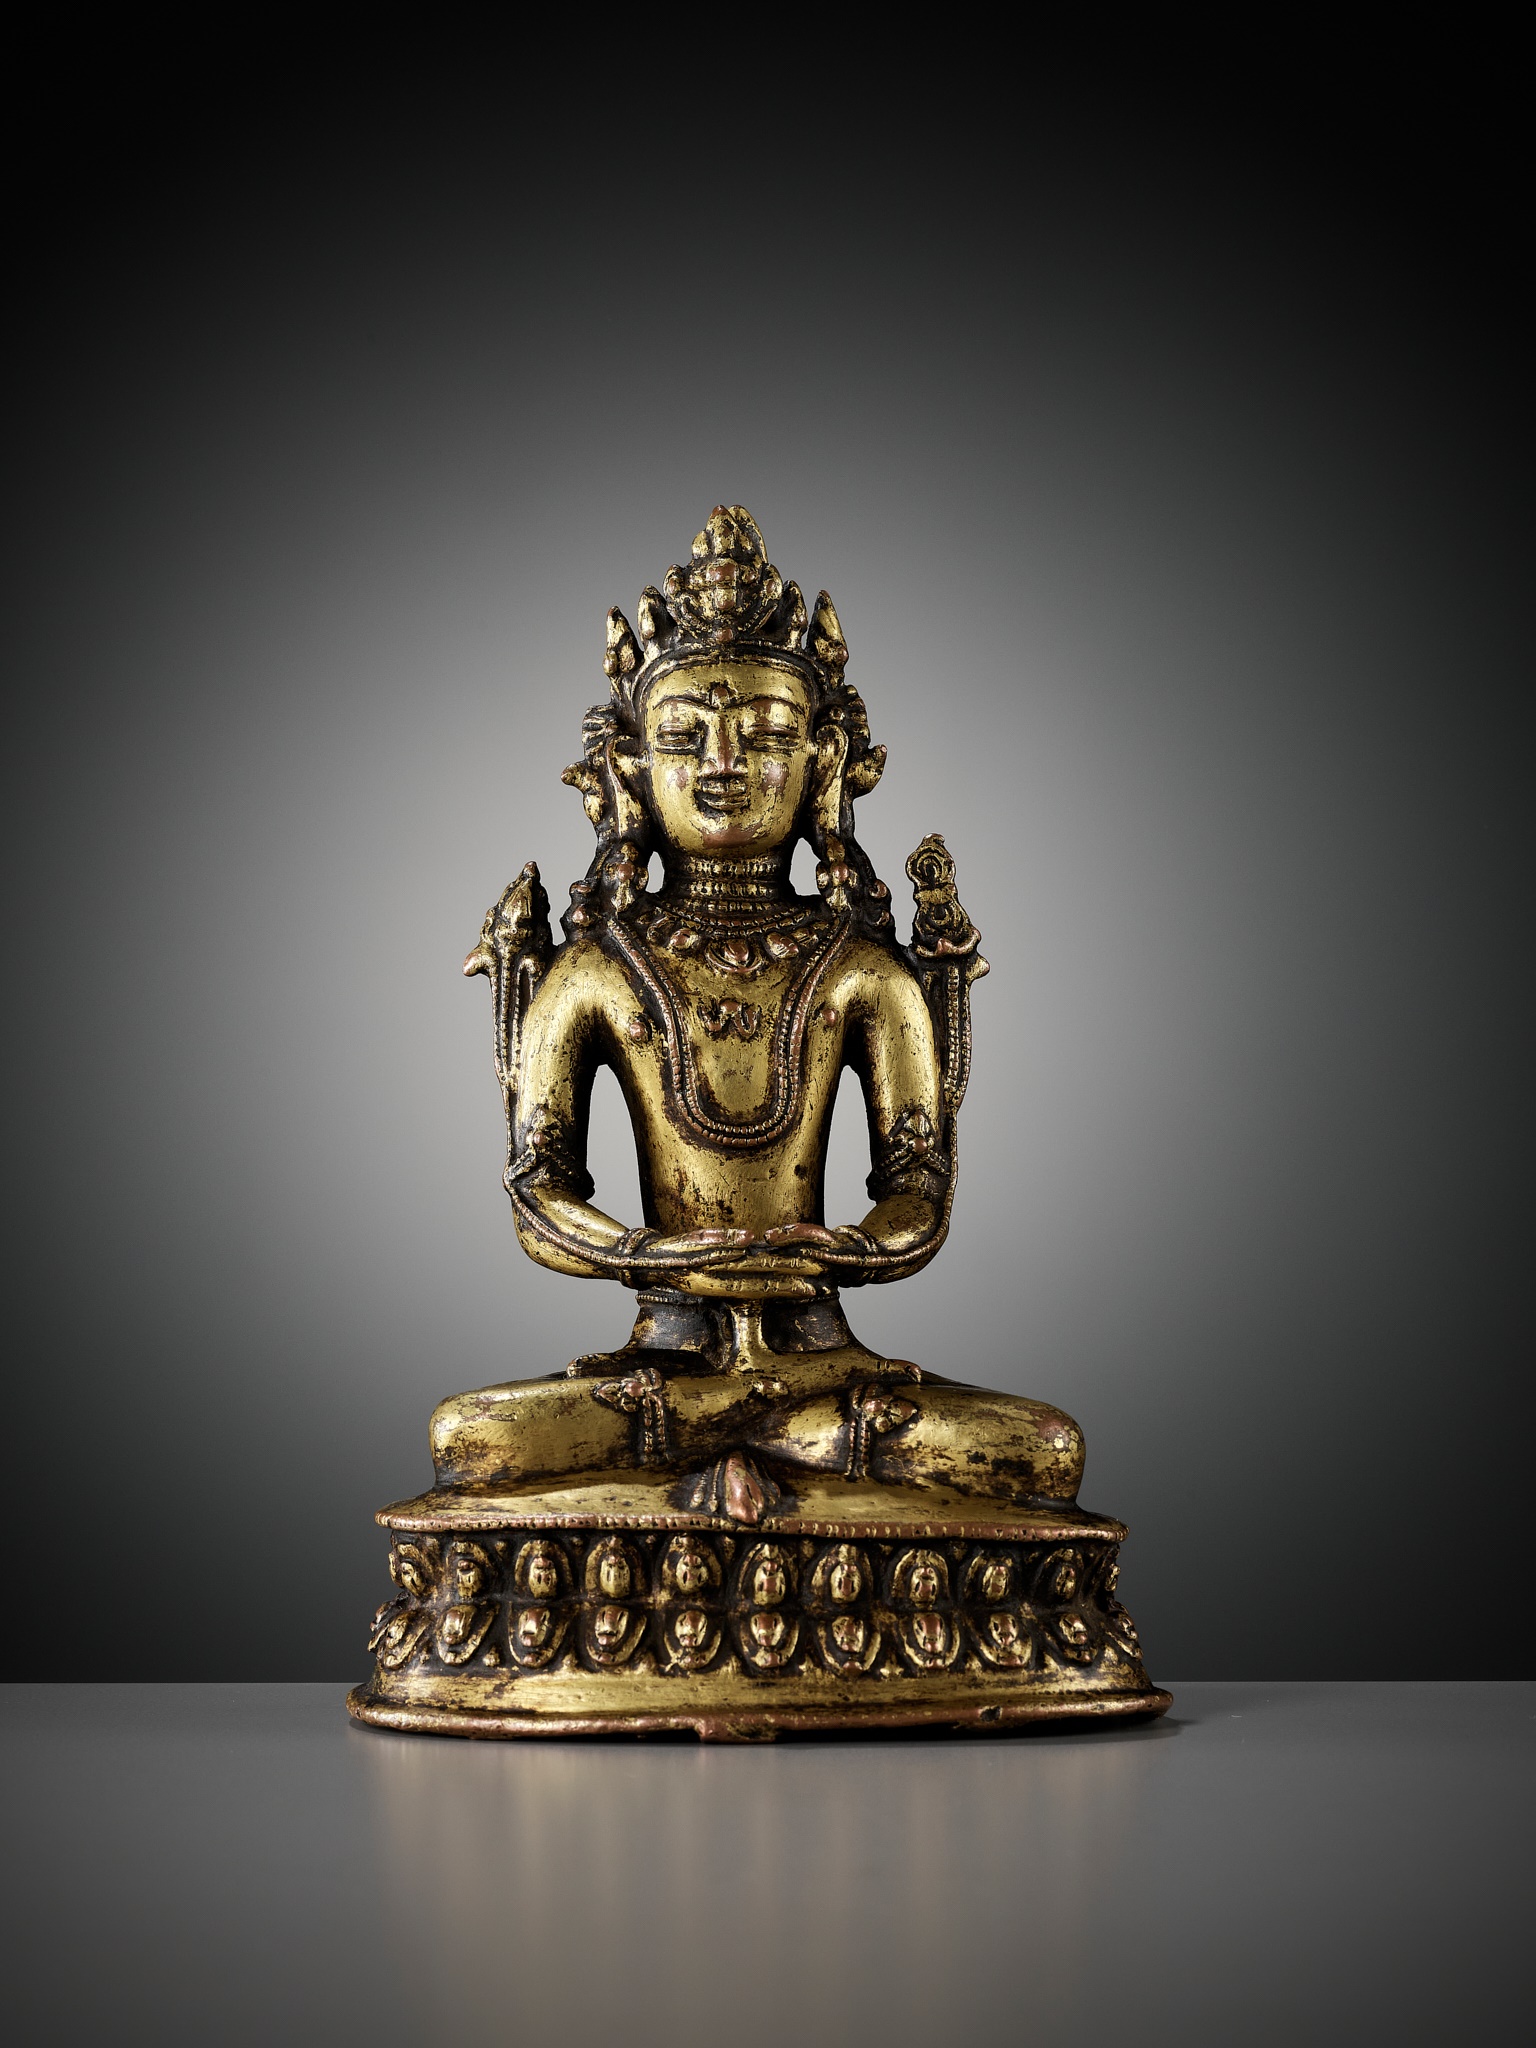 A GILT COPPER-ALLOY FIGURE OF KUNZANG AKOR, BON TRADITION, TIBET, 14TH-15TH CENTURY - Image 11 of 13